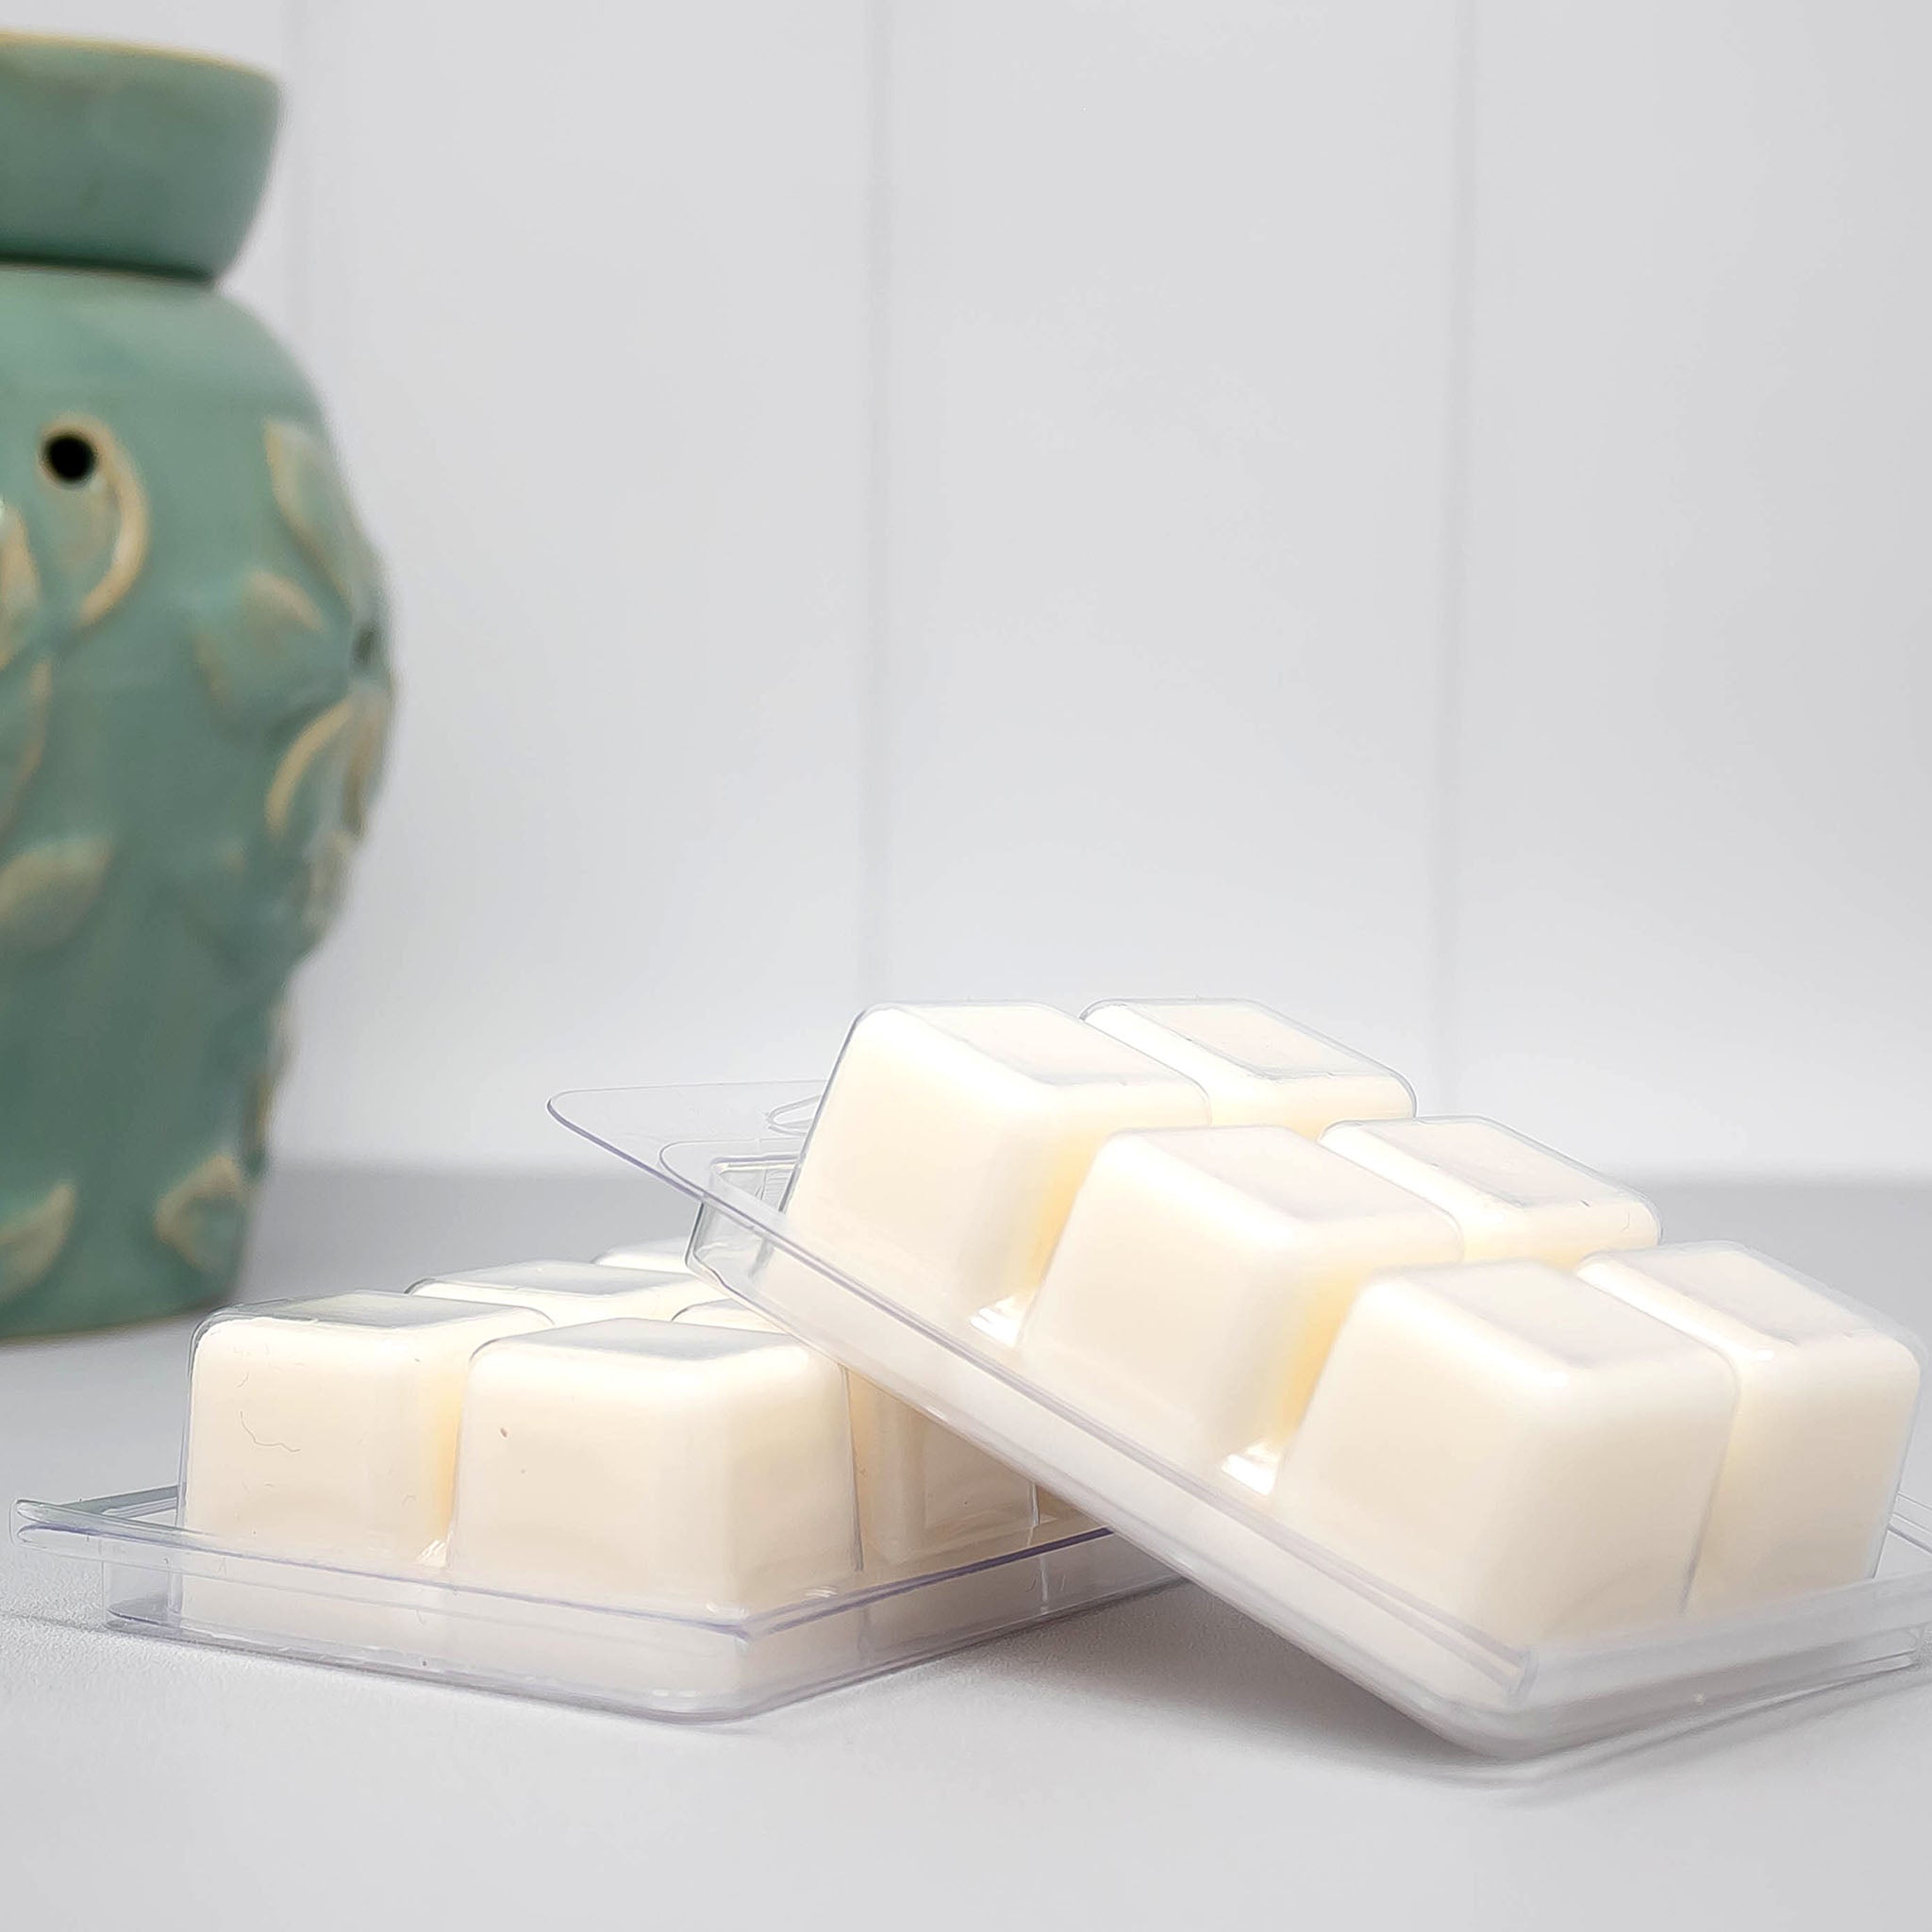 Santal + Coconut Soy Wax Blend Scented Wax Melts | Long Lasting Wax Melts |  Wax Cubes for Warmer | Gift Ideas